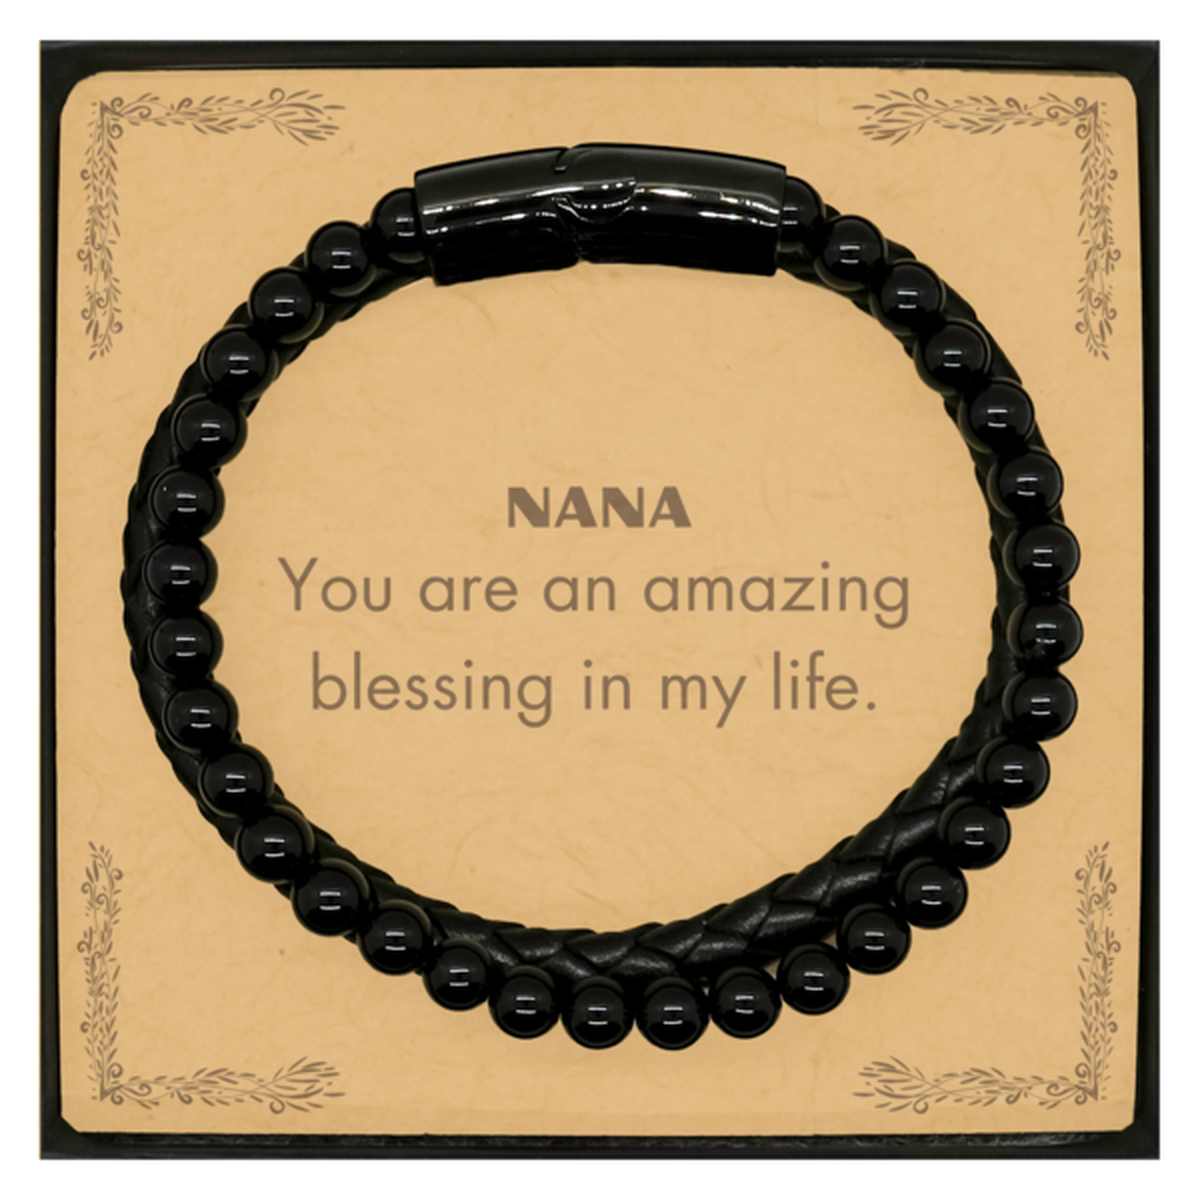 Nana Stone Leather Bracelets, You are an amazing blessing in my life, Thank You Gifts For Nana, Inspirational Birthday Christmas Unique Gifts For Nana